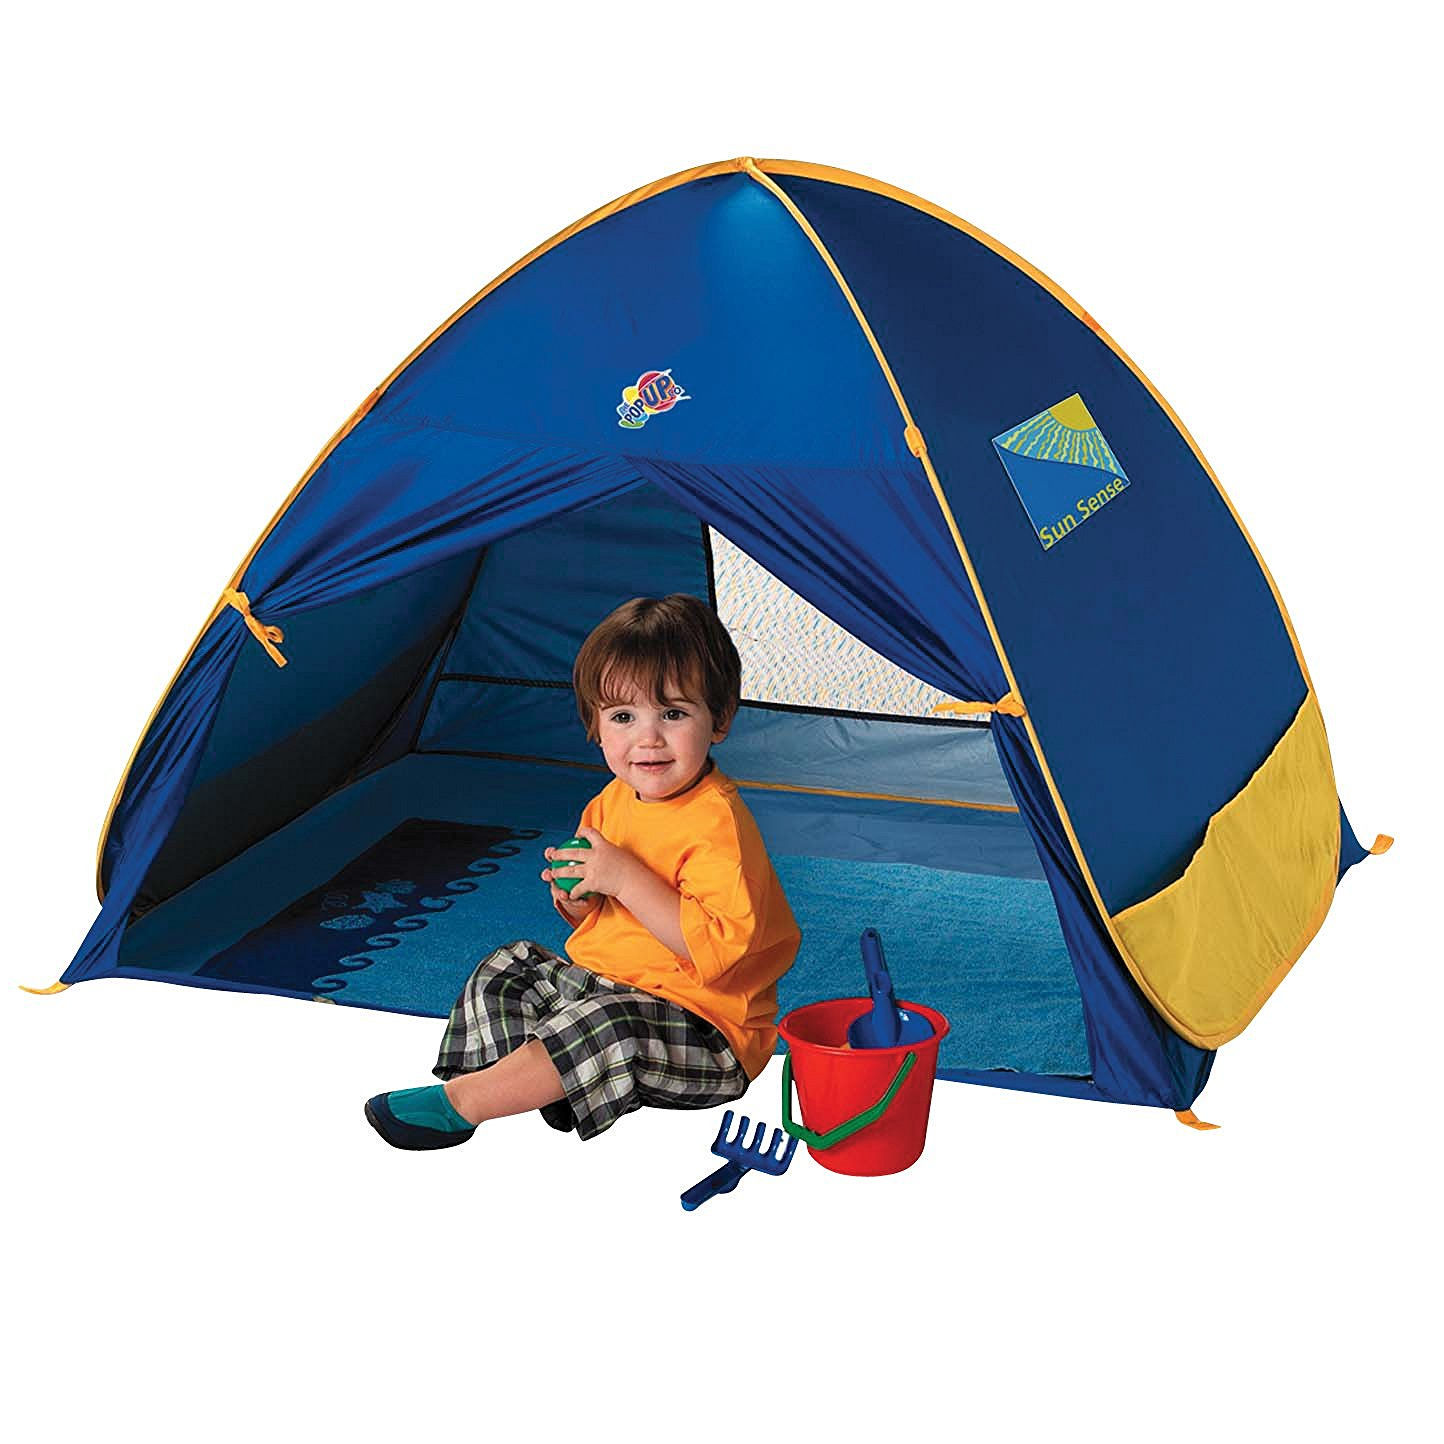 Schylling Infant UV Playshade Only $23.21! (Reg. $44.99) LOWEST Price!